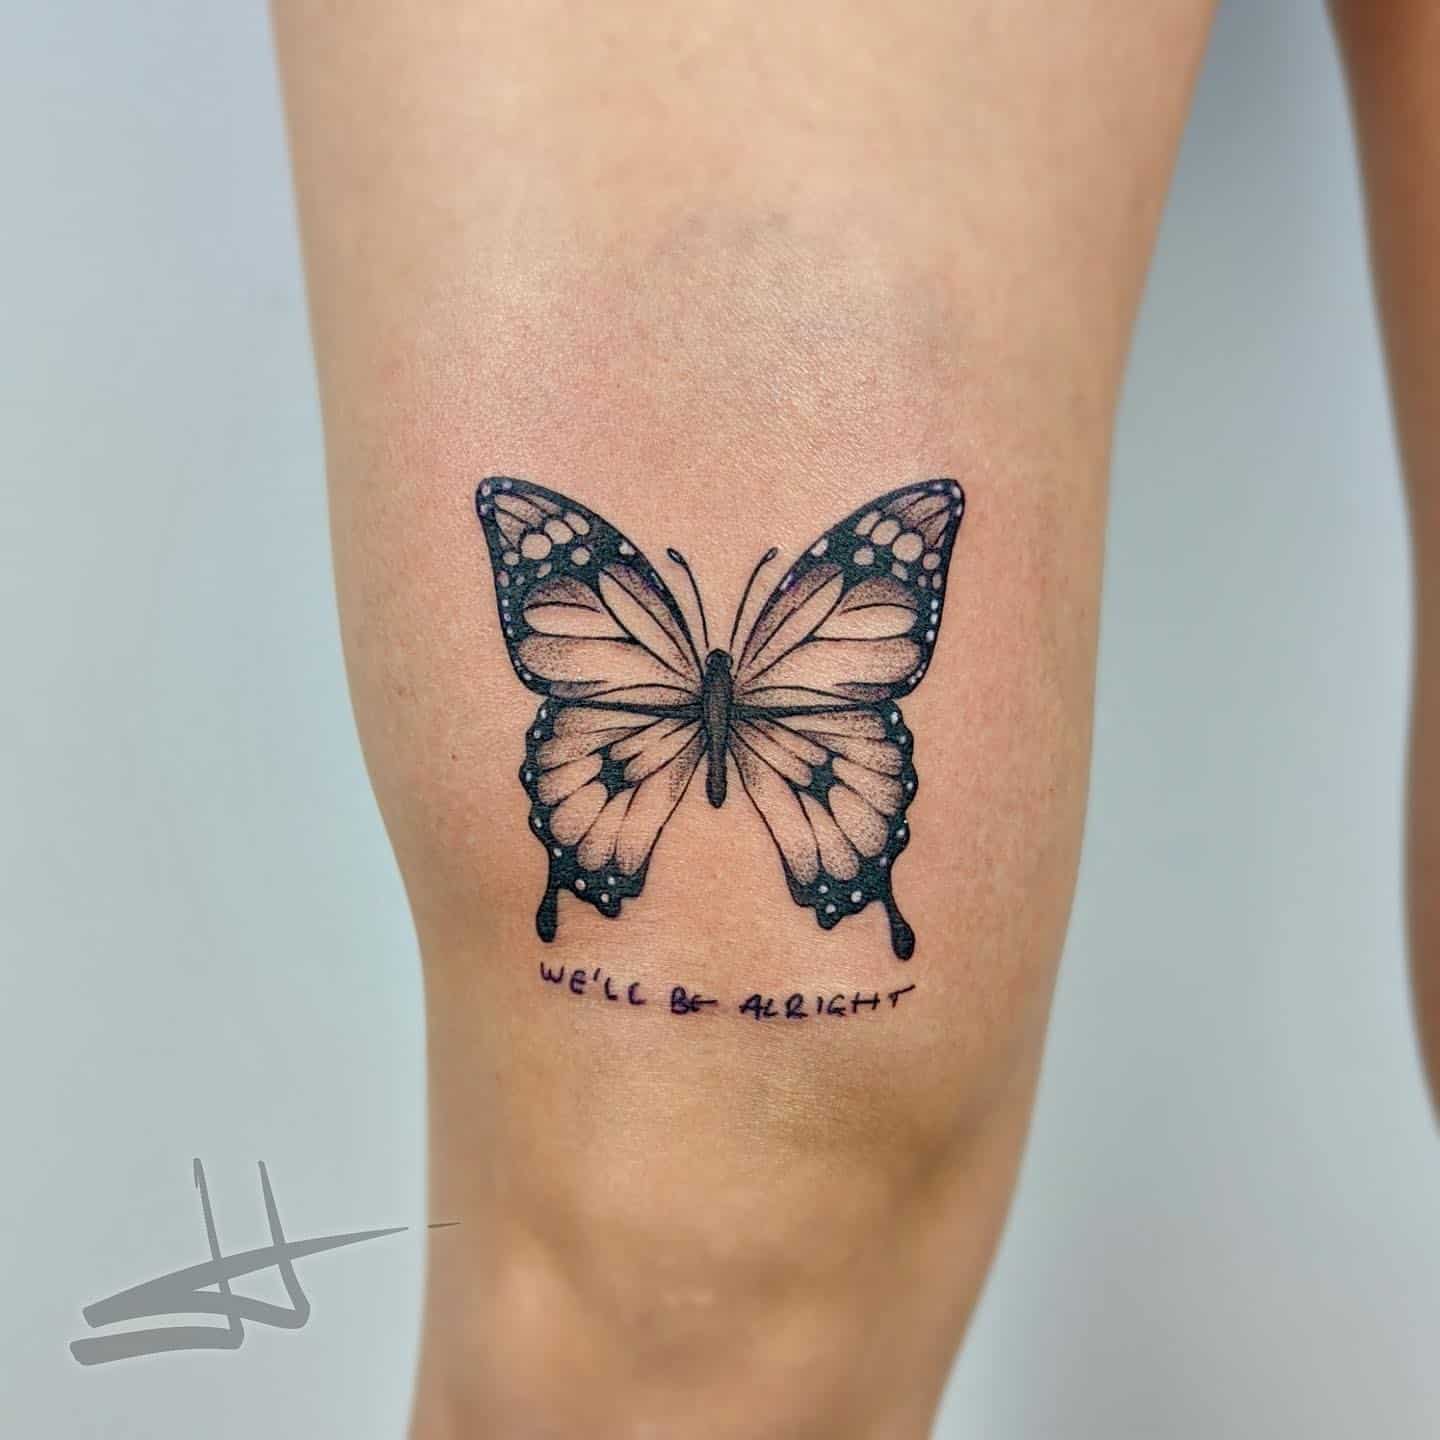 Butterfly tattoo on thigh meaning